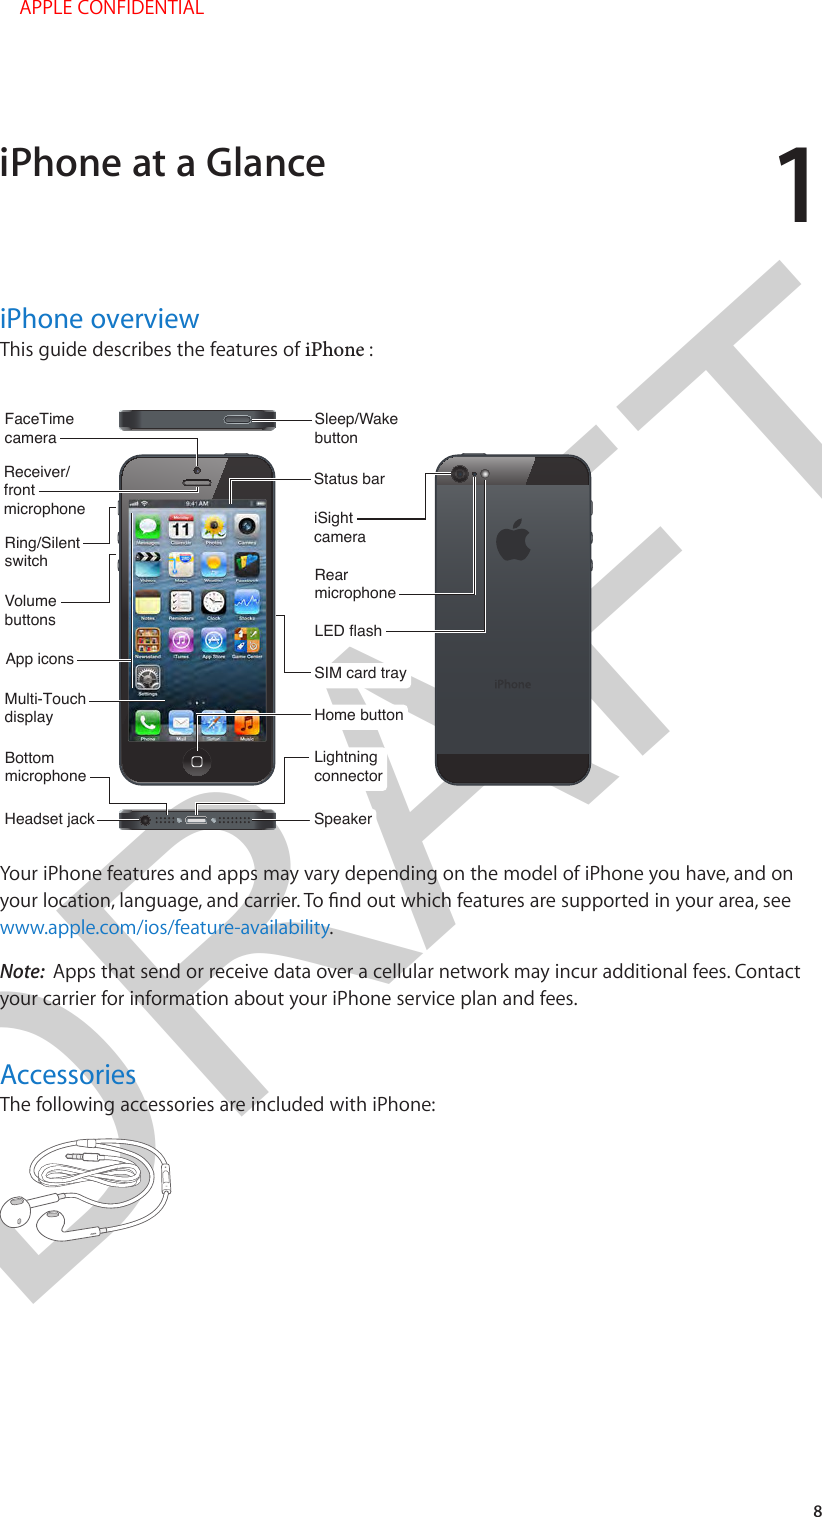 DRAFT18iPhone overviewThis guide describes the features of iPhone :SIMcardtraySIMcardtrayReceiver/frontmicrophoneReceiver/frontmicrophoneHeadsetjackHeadsetjackRing/SilentswitchRing/SilentswitchFaceTimecameraFaceTimecameraVolumebuttonsVolumebuttonsMulti-TouchdisplayMulti-TouchdisplayHomebuttonHomebuttonBottommicrophoneBottommicrophoneSleep/WakebuttonSleep/WakebuttoniSightcameraiSightcameraLED flashLED flashRearmicrophoneRearmicrophoneApp iconsApp iconsStatusbarStatusbarSpeakerSpeakerLightningconnectorLightningconnectorYour iPhone features and apps may vary depending on the model of iPhone you have, and on your location, language, and carrier. To nd out which features are supported in your area, see www.apple.com/ios/feature-availability.Note:  Apps that send or receive data over a cellular network may incur additional fees. Contact your carrier for information about your iPhone service plan and fees.AccessoriesThe following accessories are included with iPhone:iPhone at a Glance APPLE CONFIDENTIAL